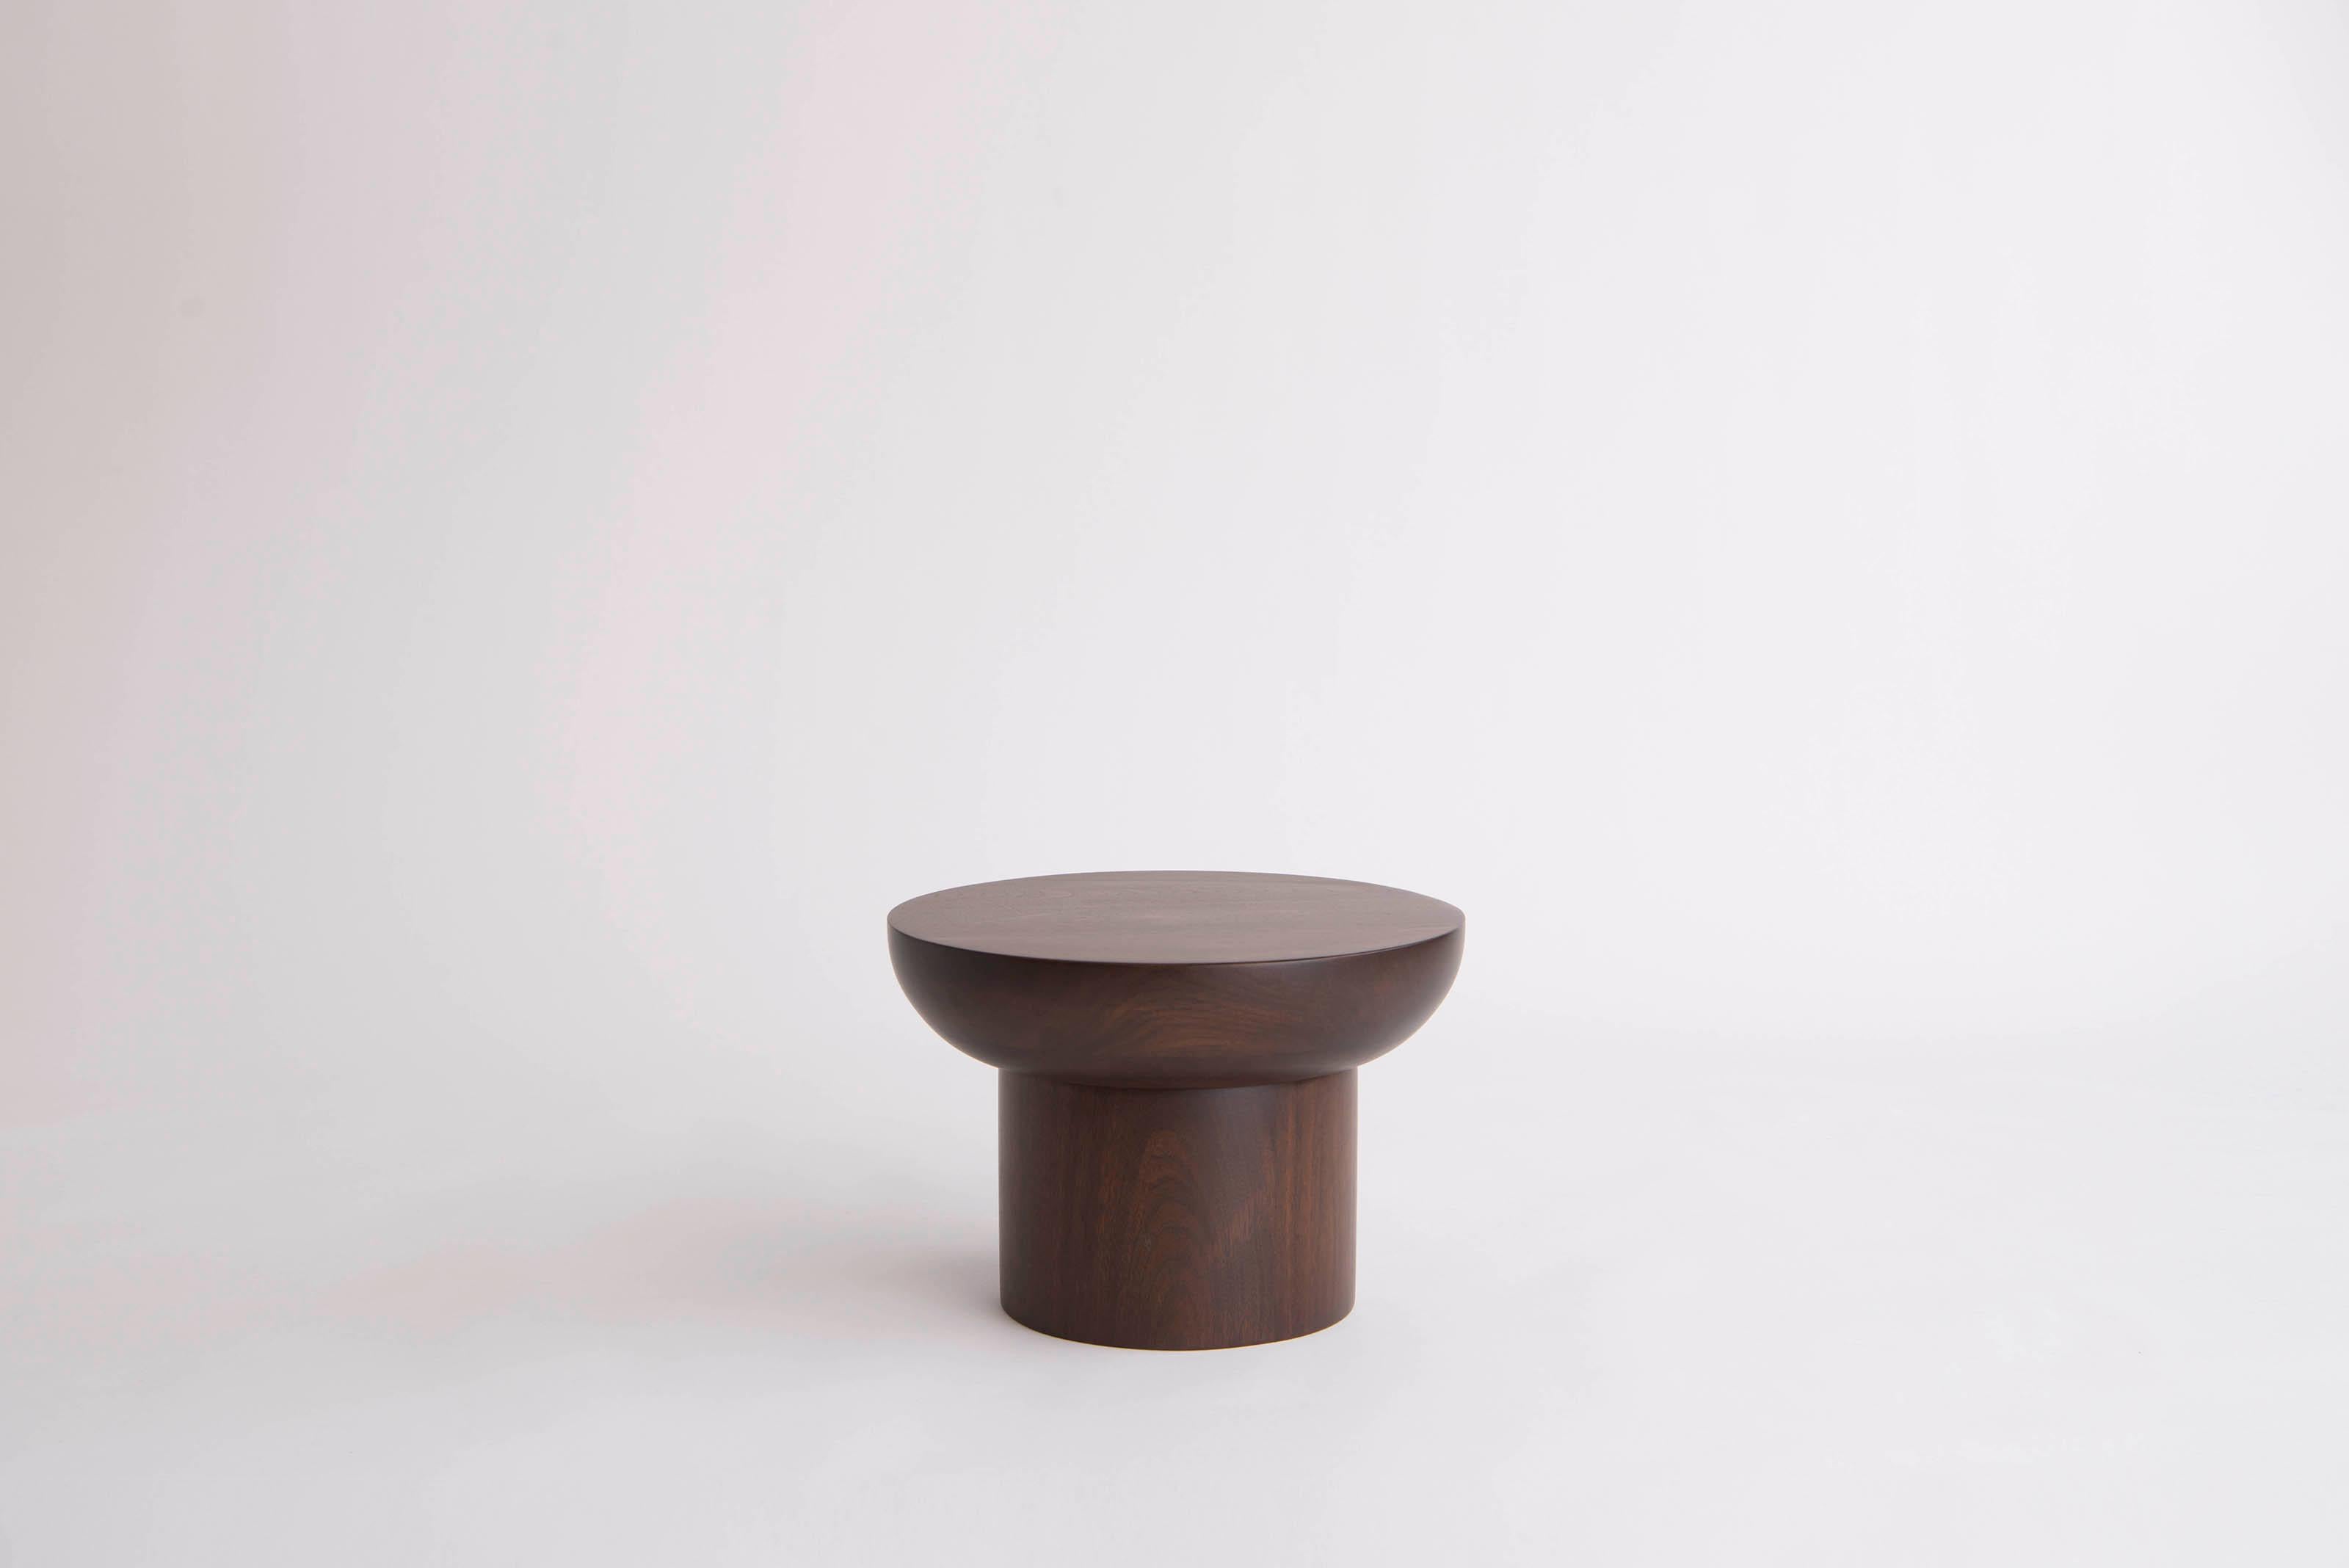 Dombak Small Side Table by Phase Design
Dimensions: Ø 40,6 x H 28 cm. 
Materials: Walnut.

Turned solid wood construction available in walnut, white oak, or ebonized oak. Available in three different sizes. Prices may vary. Please contact